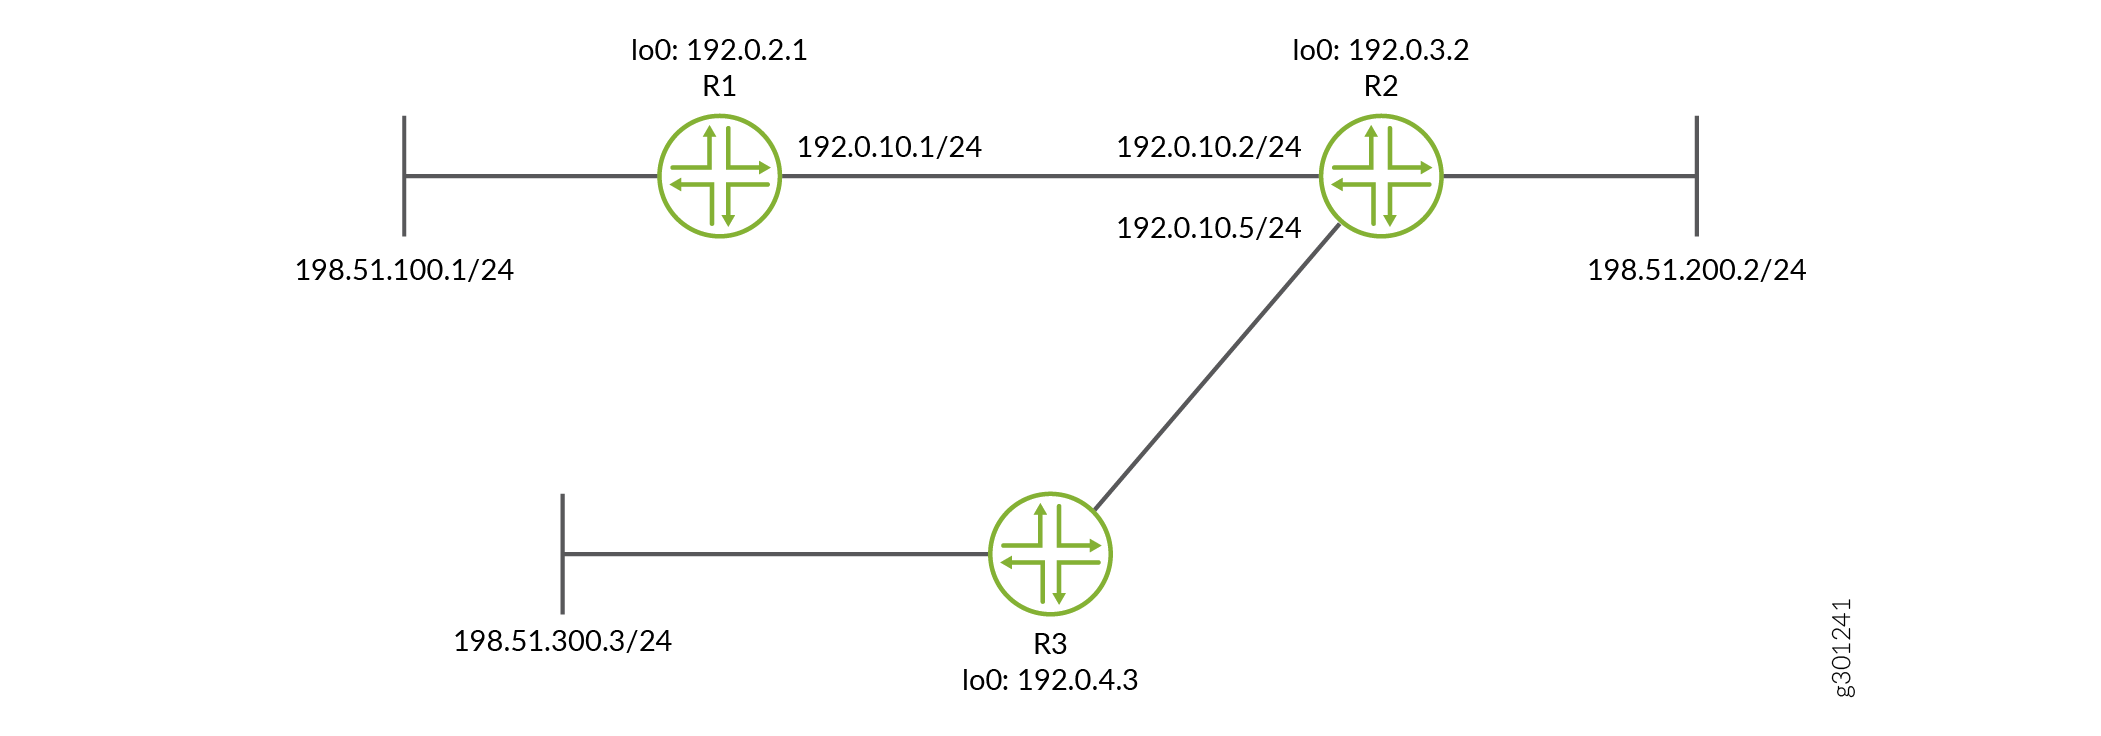 Network Topology for RIP Authentication using multiple MD5 keys